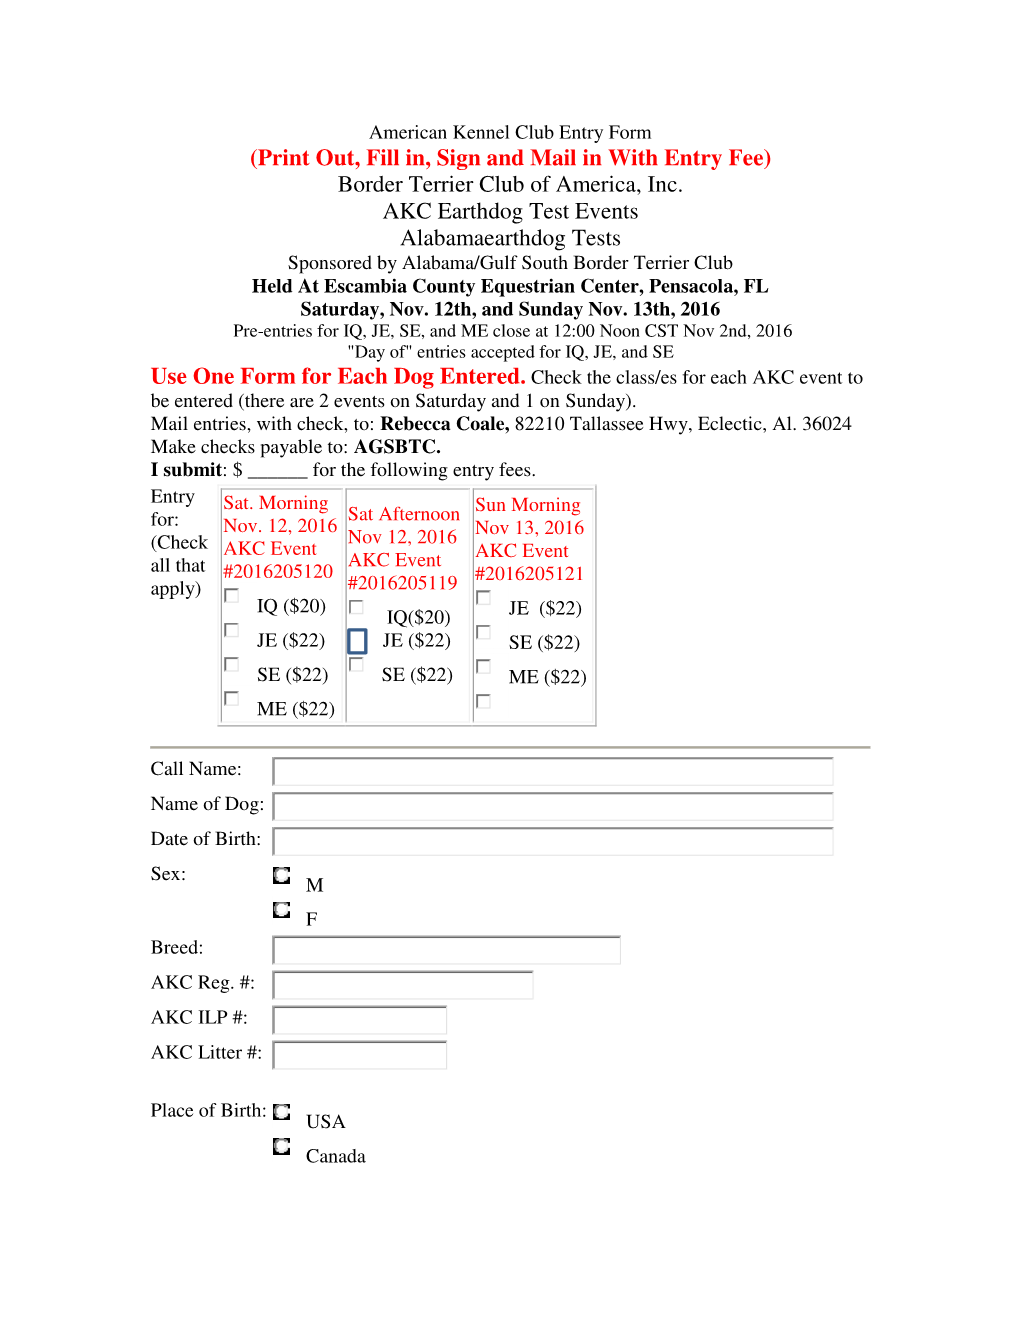 (Print Out, Fill In, Sign and Mail in with Entry Fee) Border Terrier Club of America, Inc